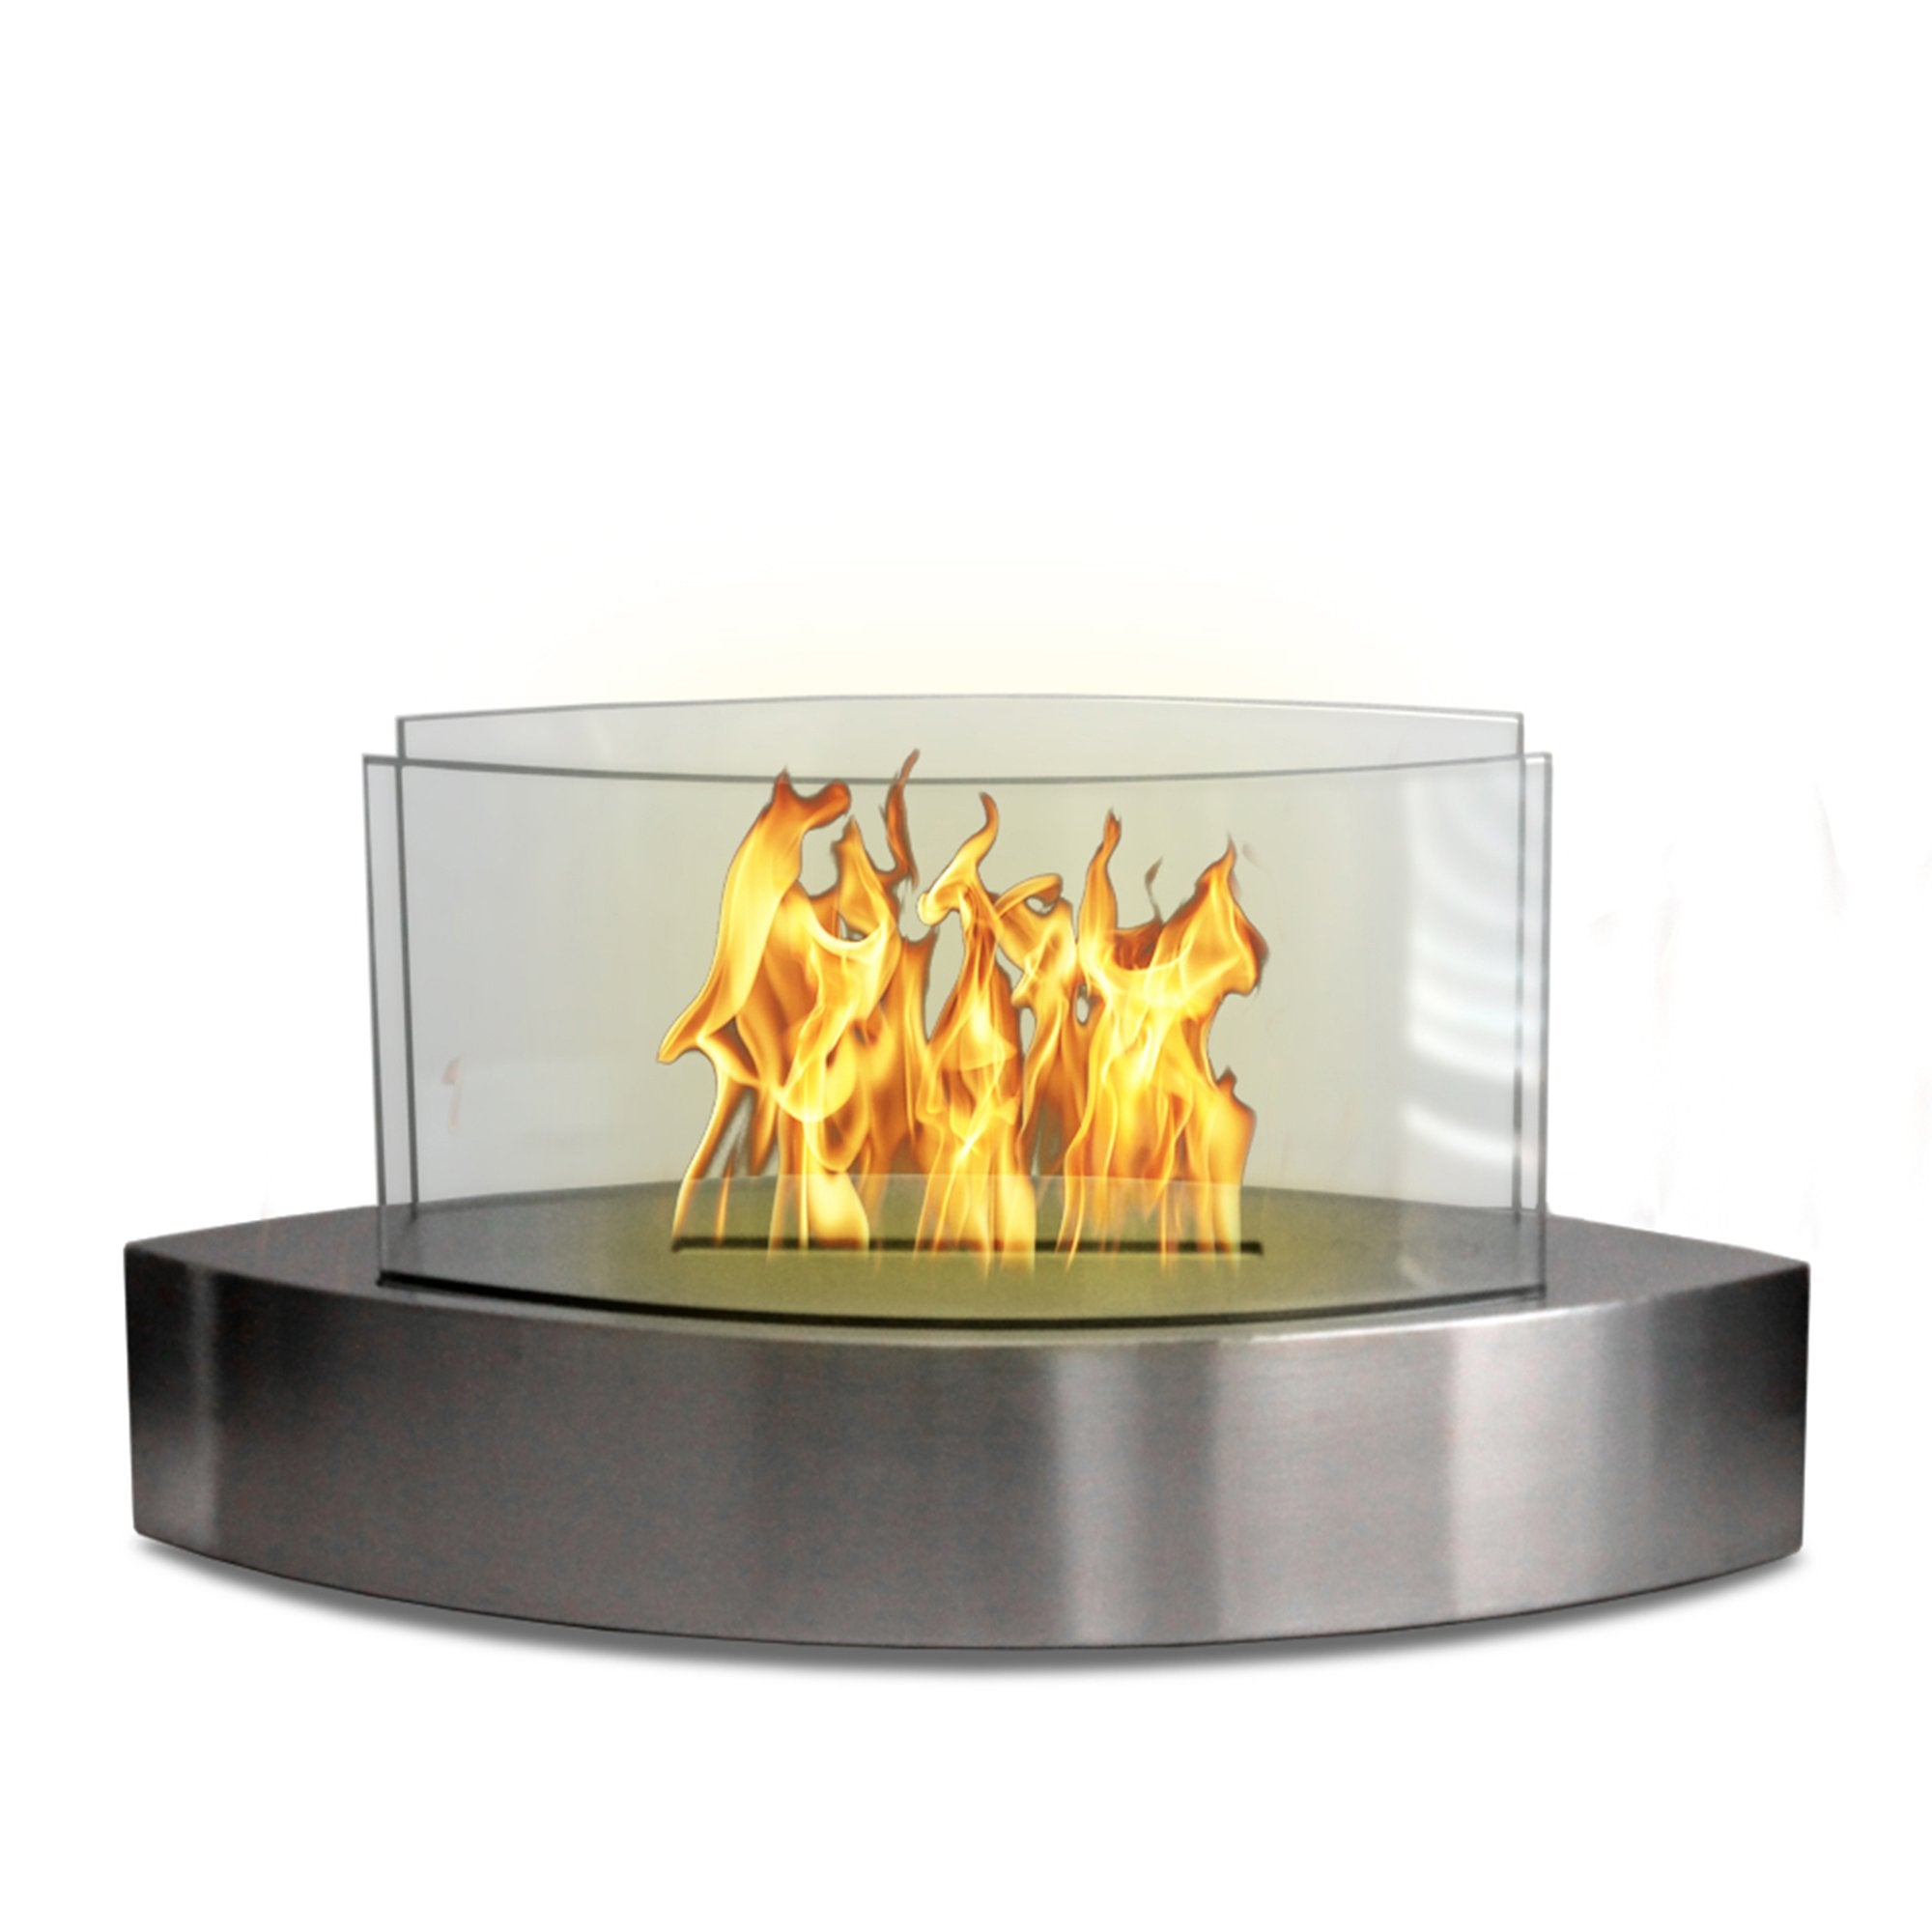 Lexington Table Top BioEthanol Fireplace in Stainless Steel